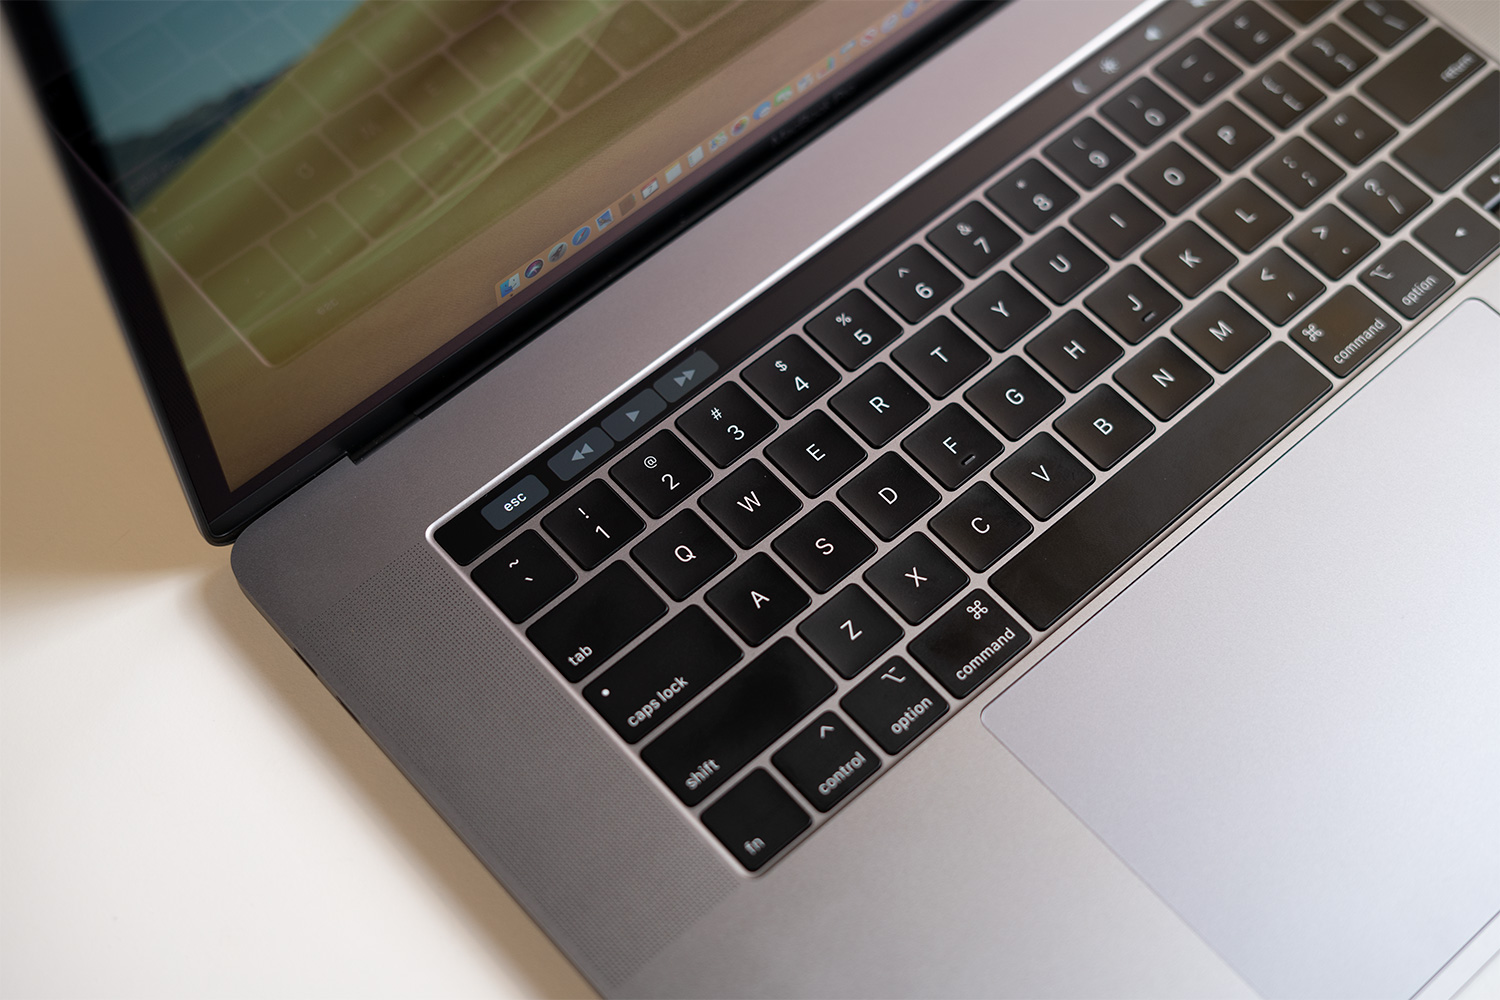 Apple MacBook Pro (15-inch, 2019) - Full Review and Benchmarks